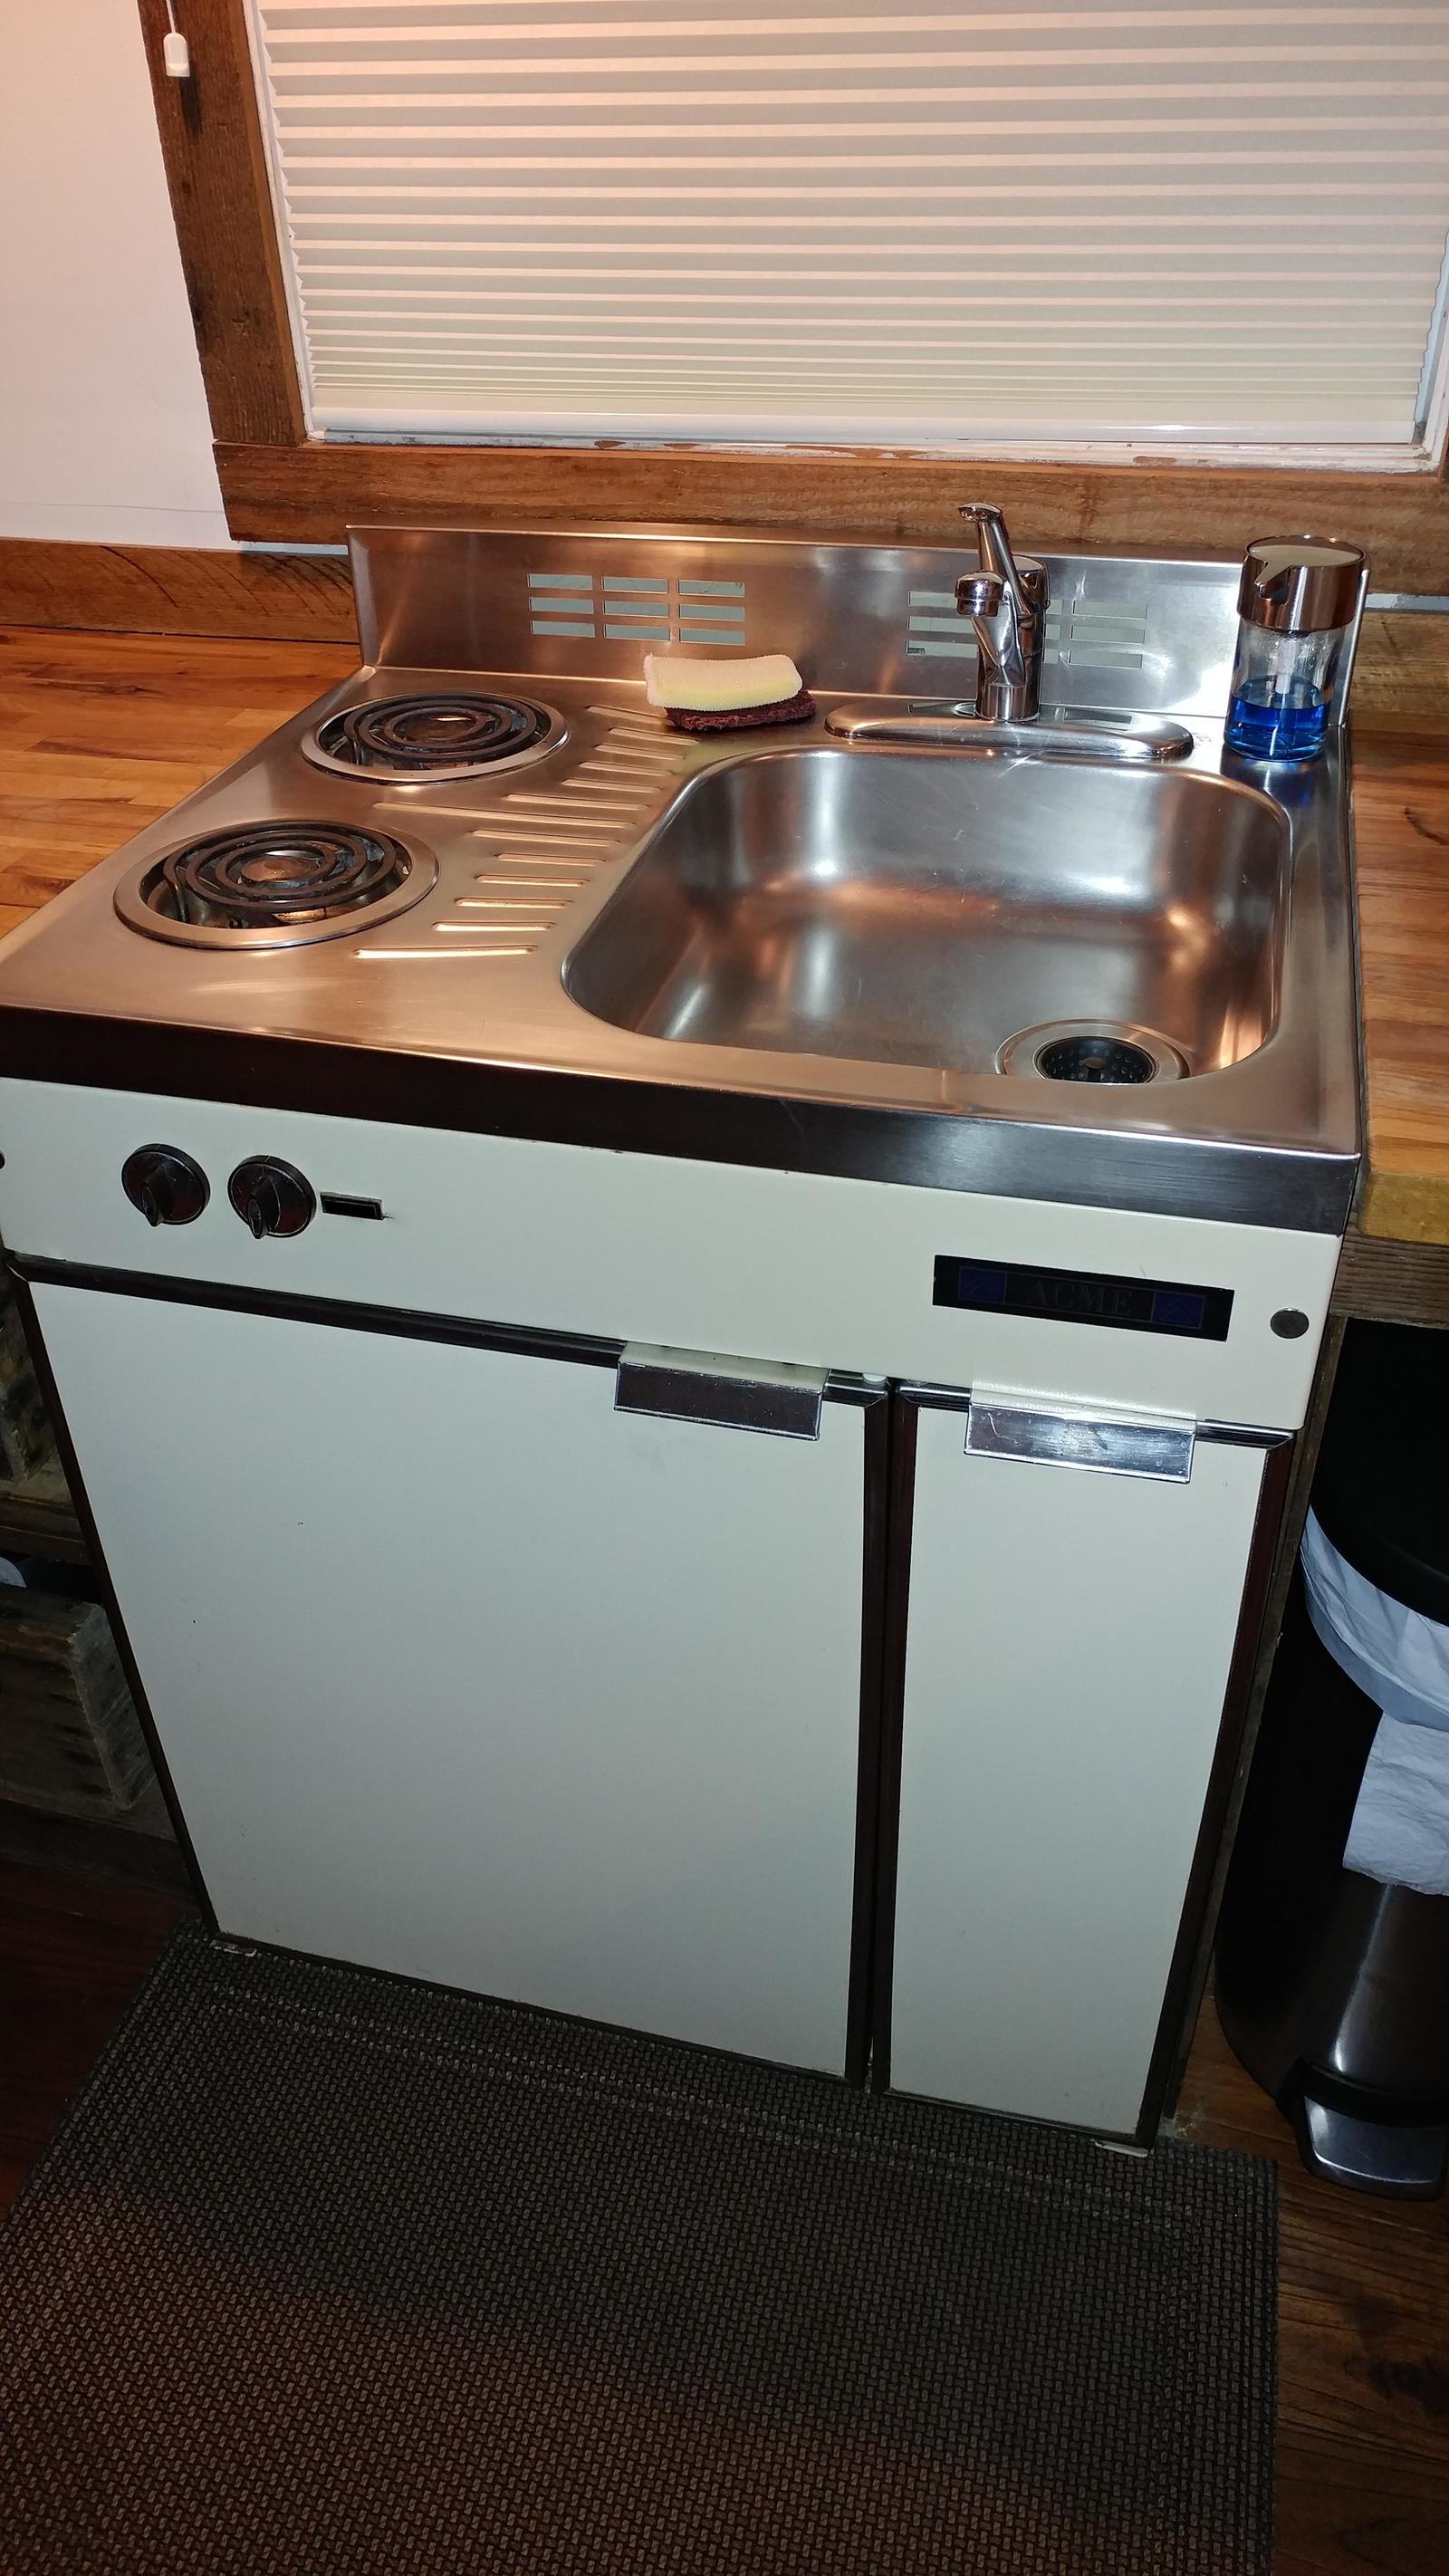 Sink/stove/fridge combo in tiny house I'm currently renting - The photo, Plate, Sink, Refrigerator, Kitchen, USA, Saving, Reddit